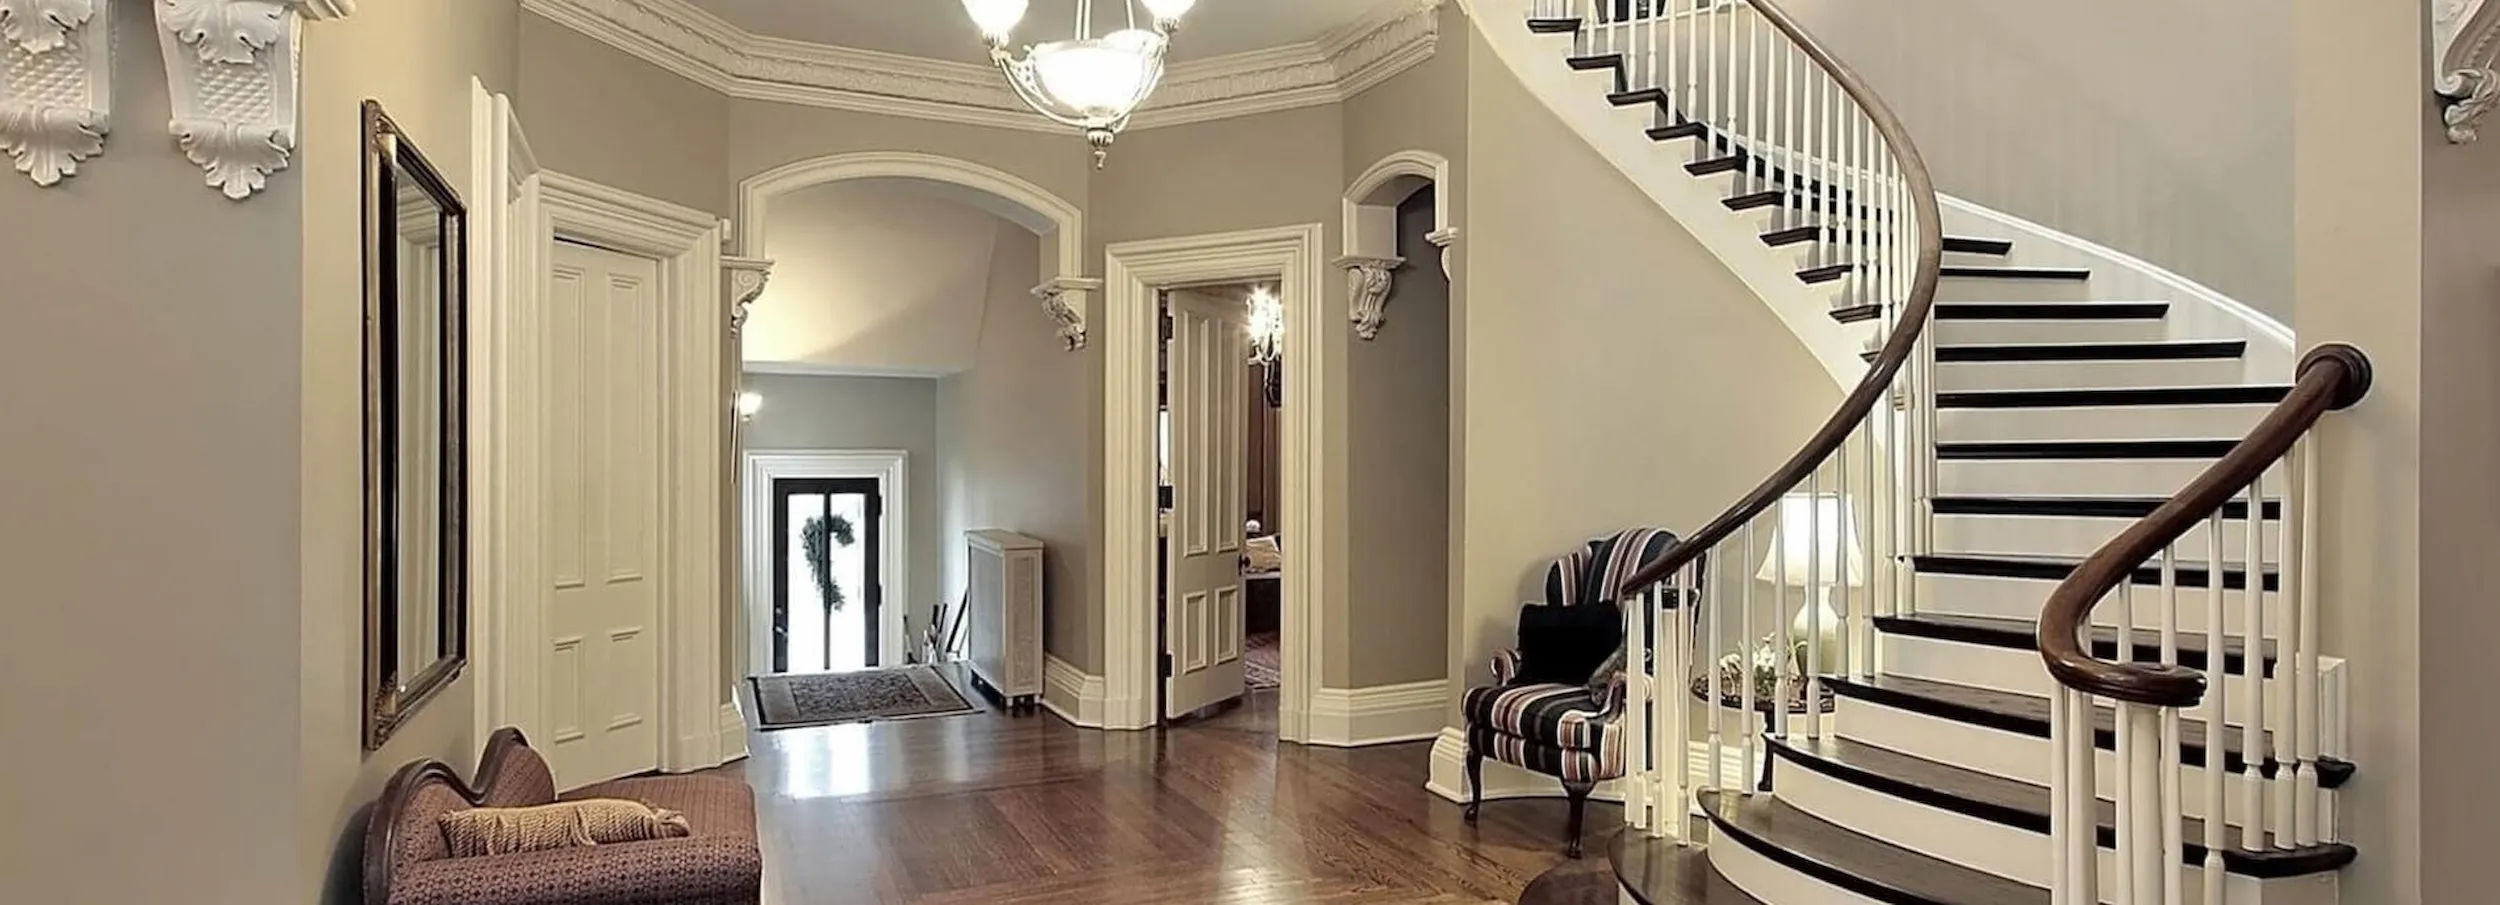 Staircase in a decorated foyer that opens to other rooms in house with hardwood floors.